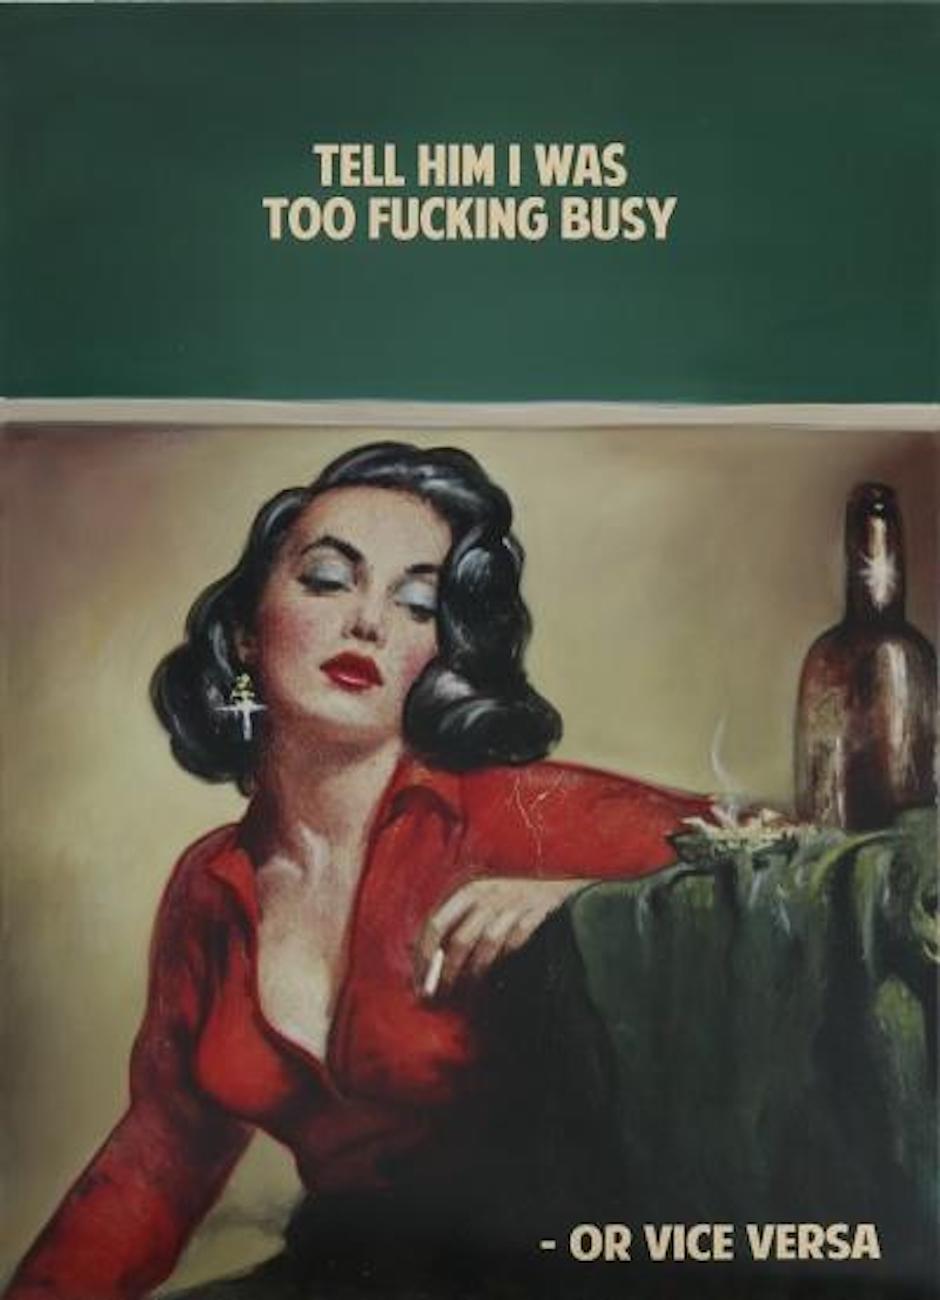 Tell Him I Was Too Fucking Busy Or Vice Versa - Painting by The Connor Brothers 